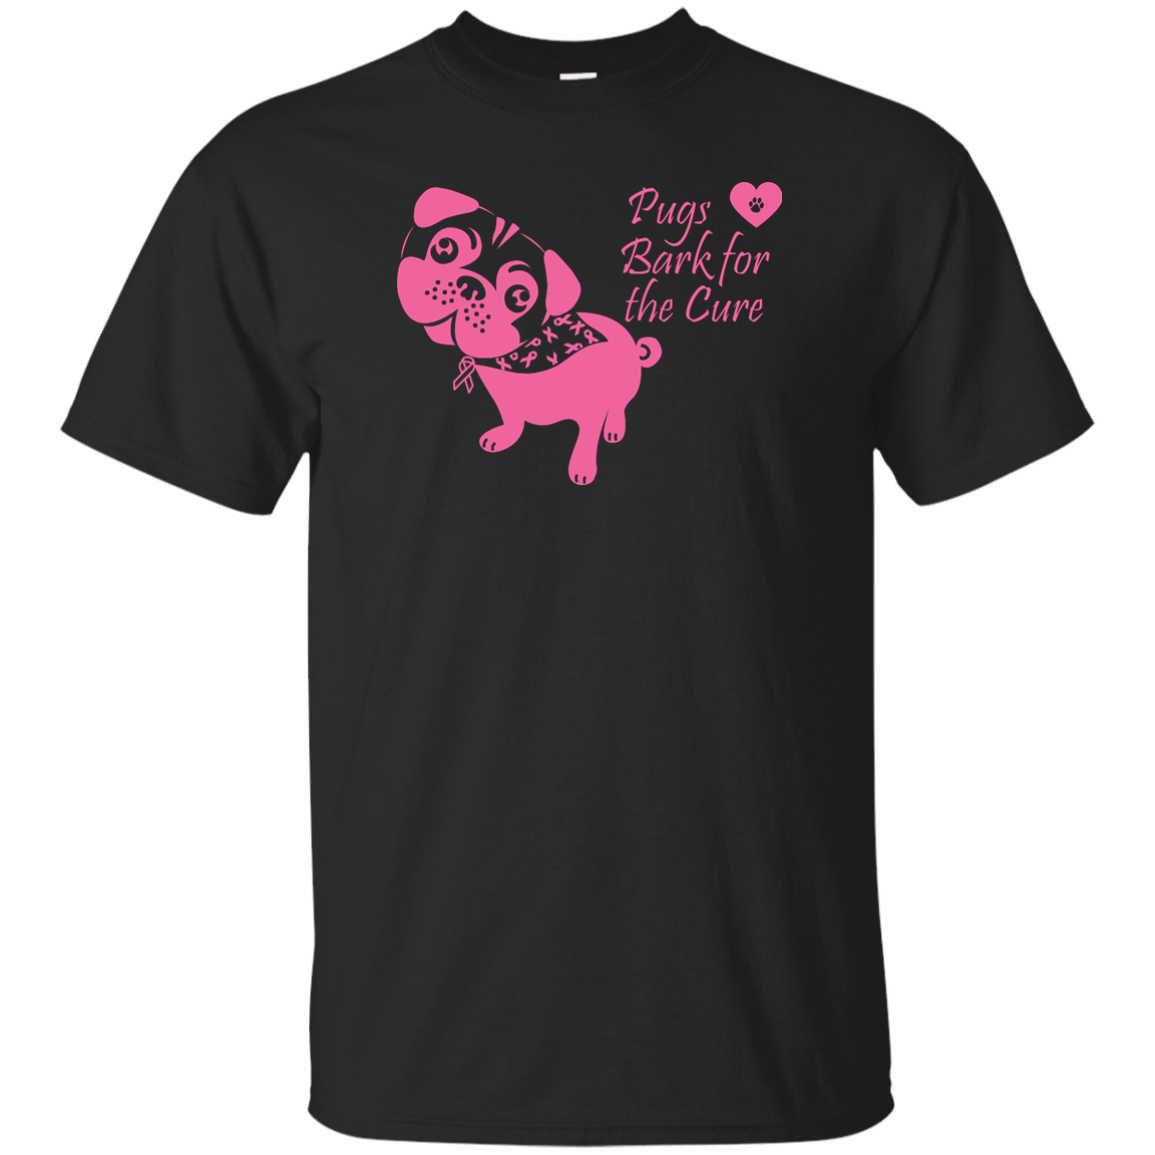 Pugs Bark for the Cure Shirts